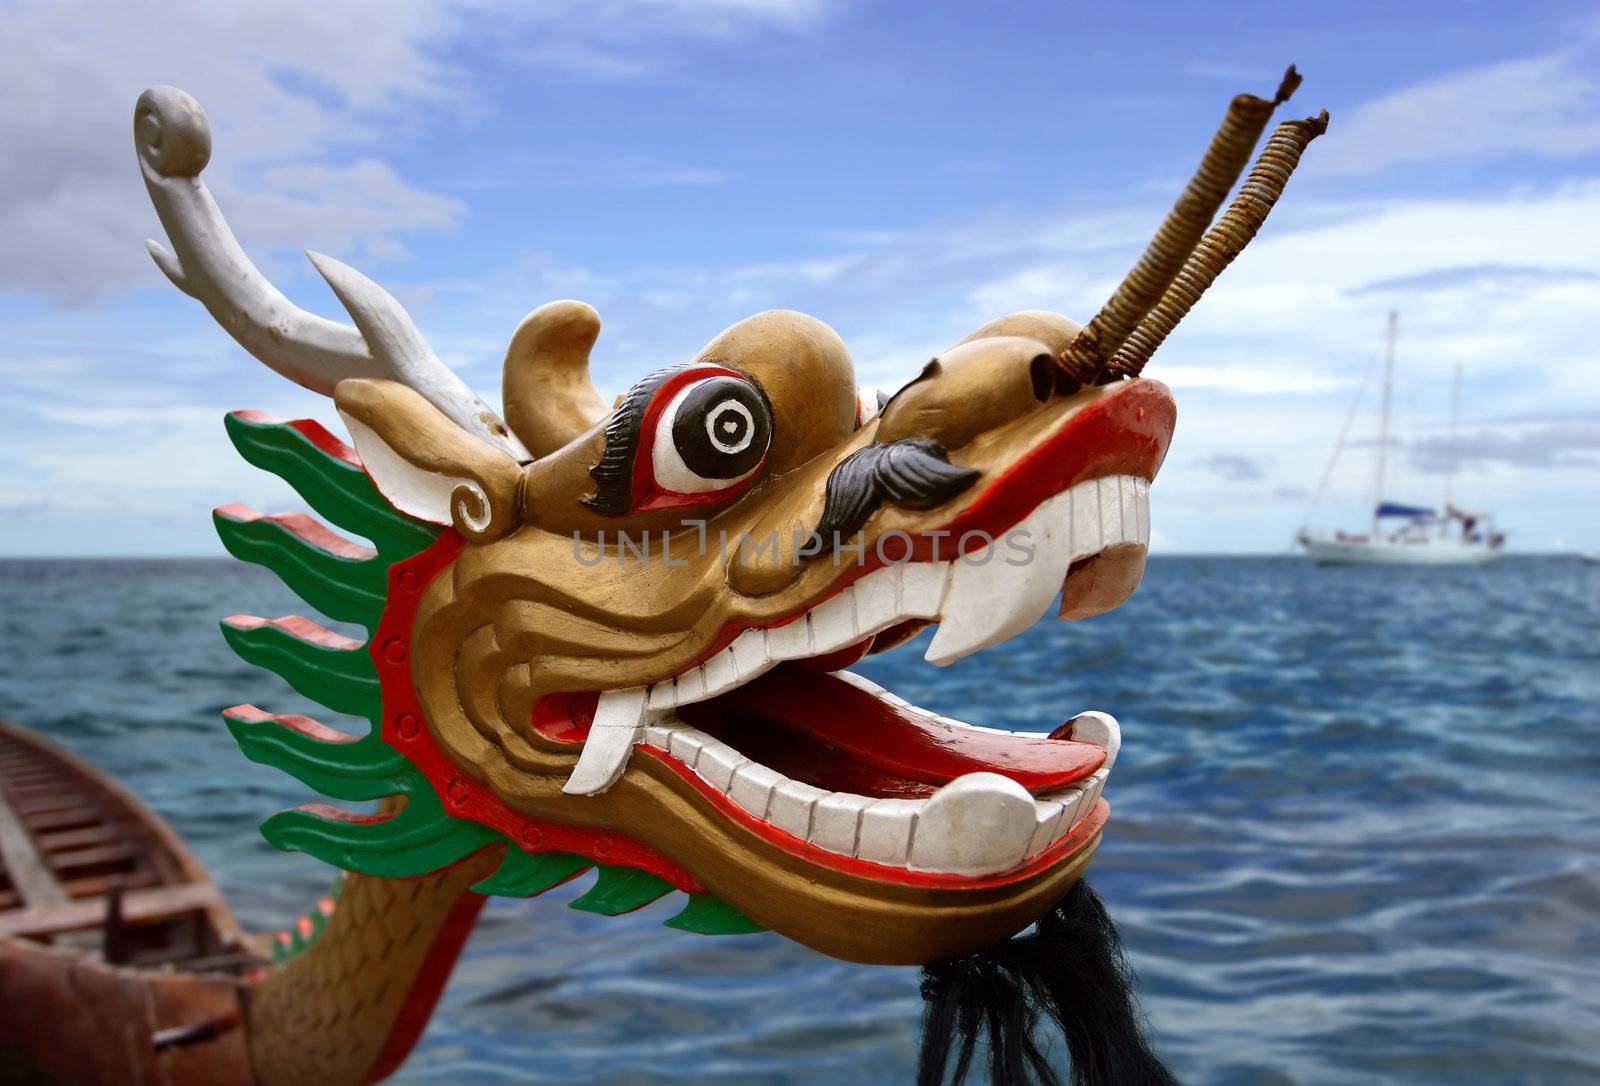 Dragon boat by sumners